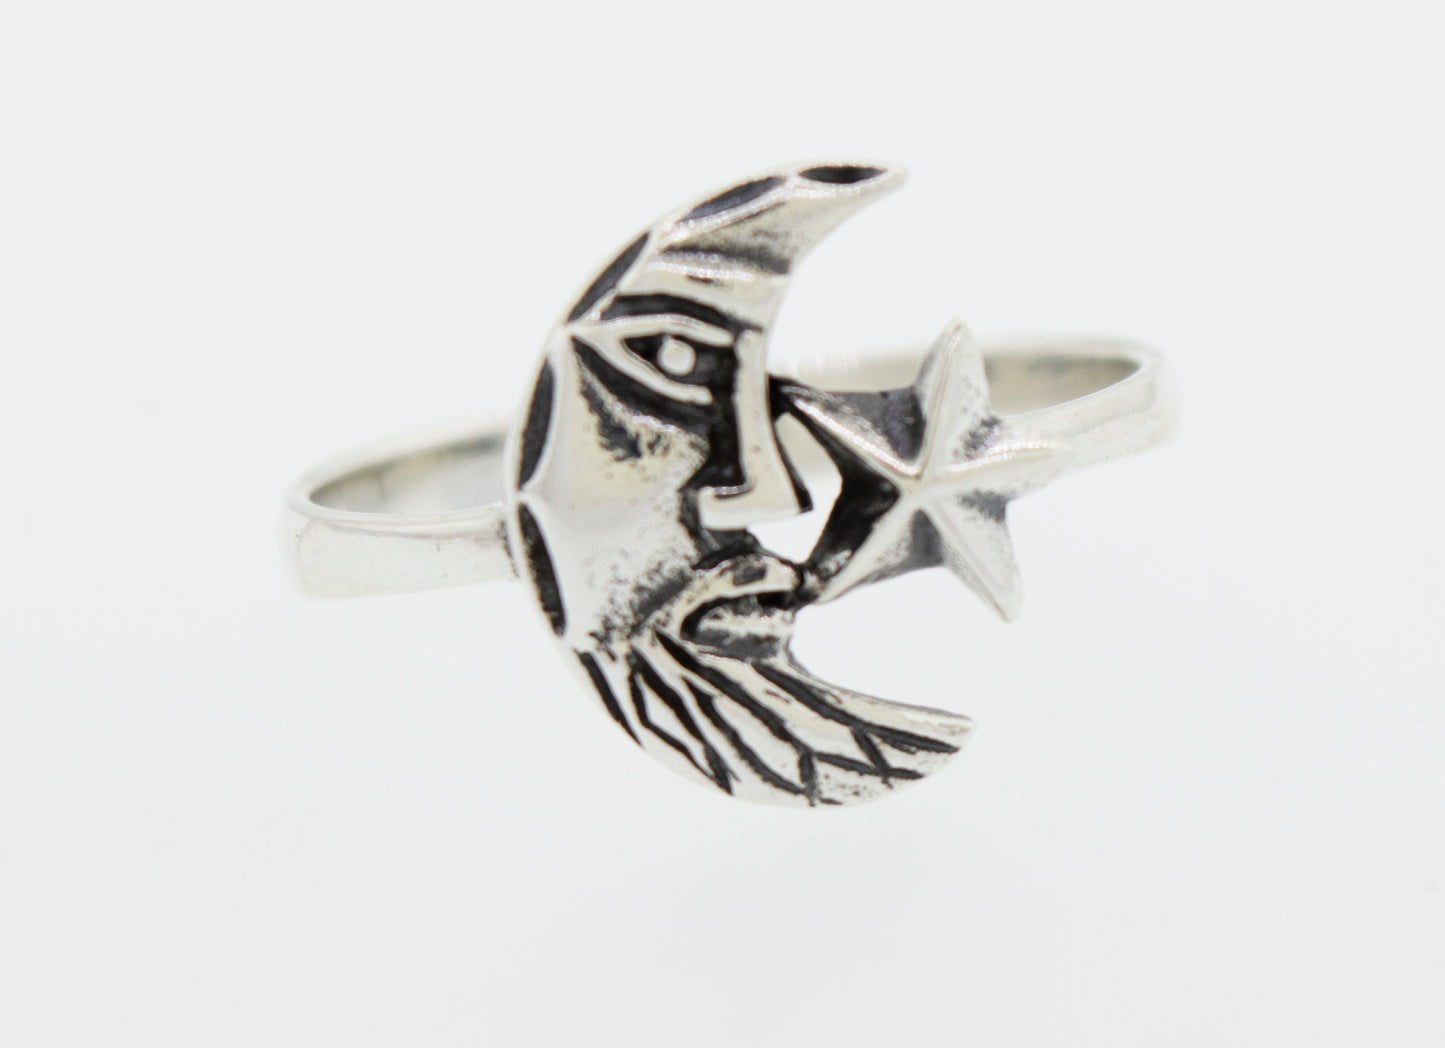 A "Man In the Moon Ring" by Super Silver, featuring a star on it.